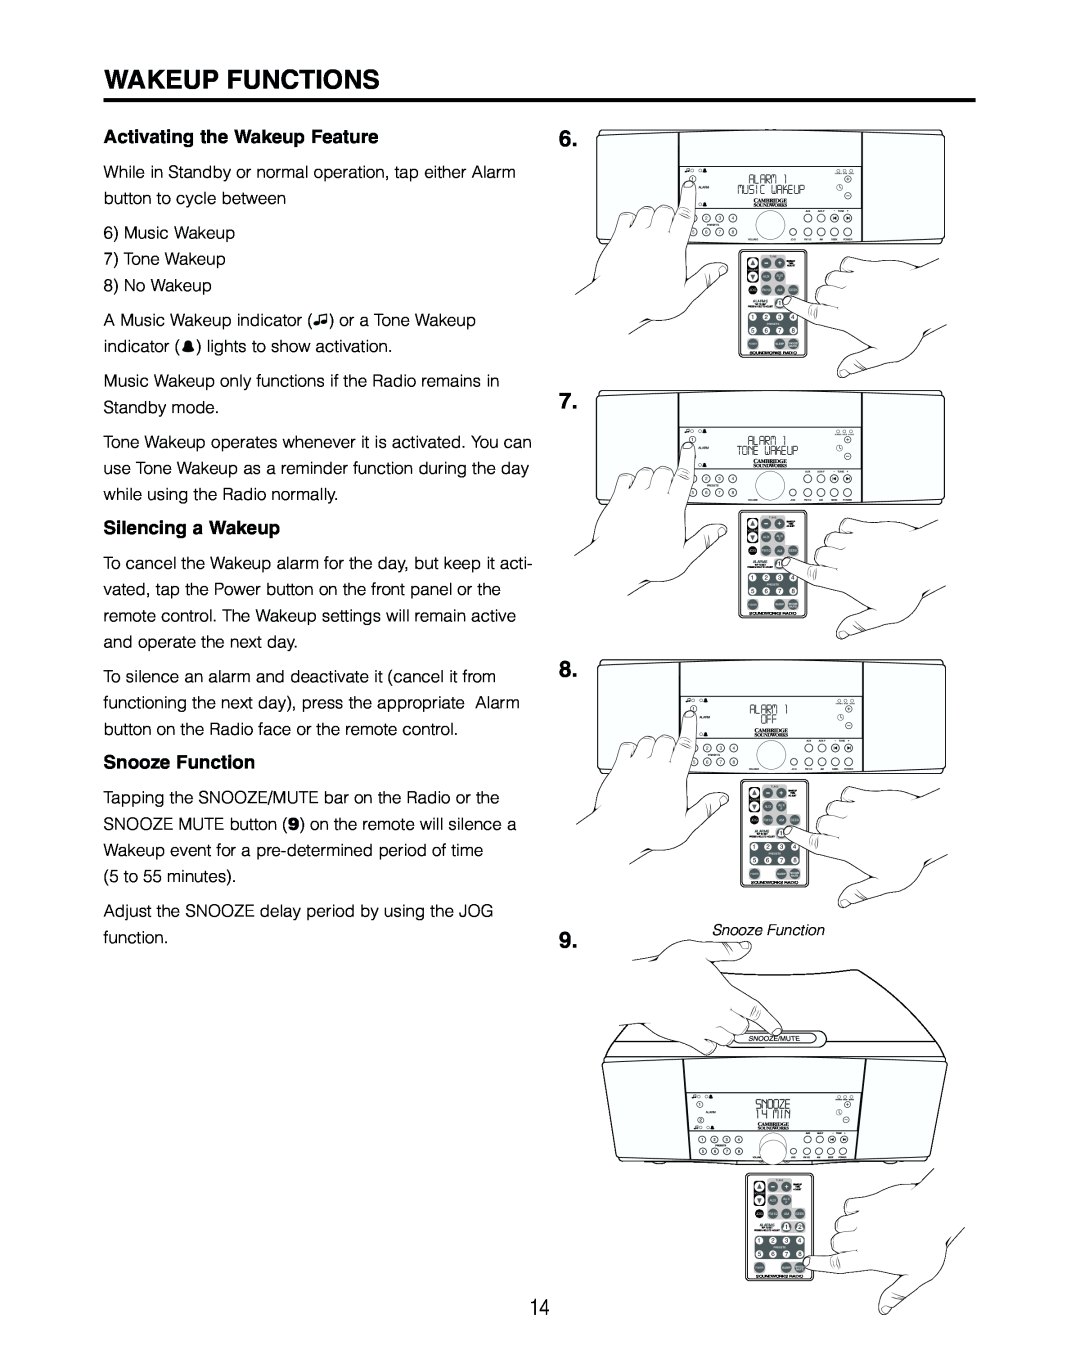 Cambridge SoundWorks 730 user manual Activating the Wakeup Feature, Silencing a Wakeup, Snooze Function, Wakeup Functions 